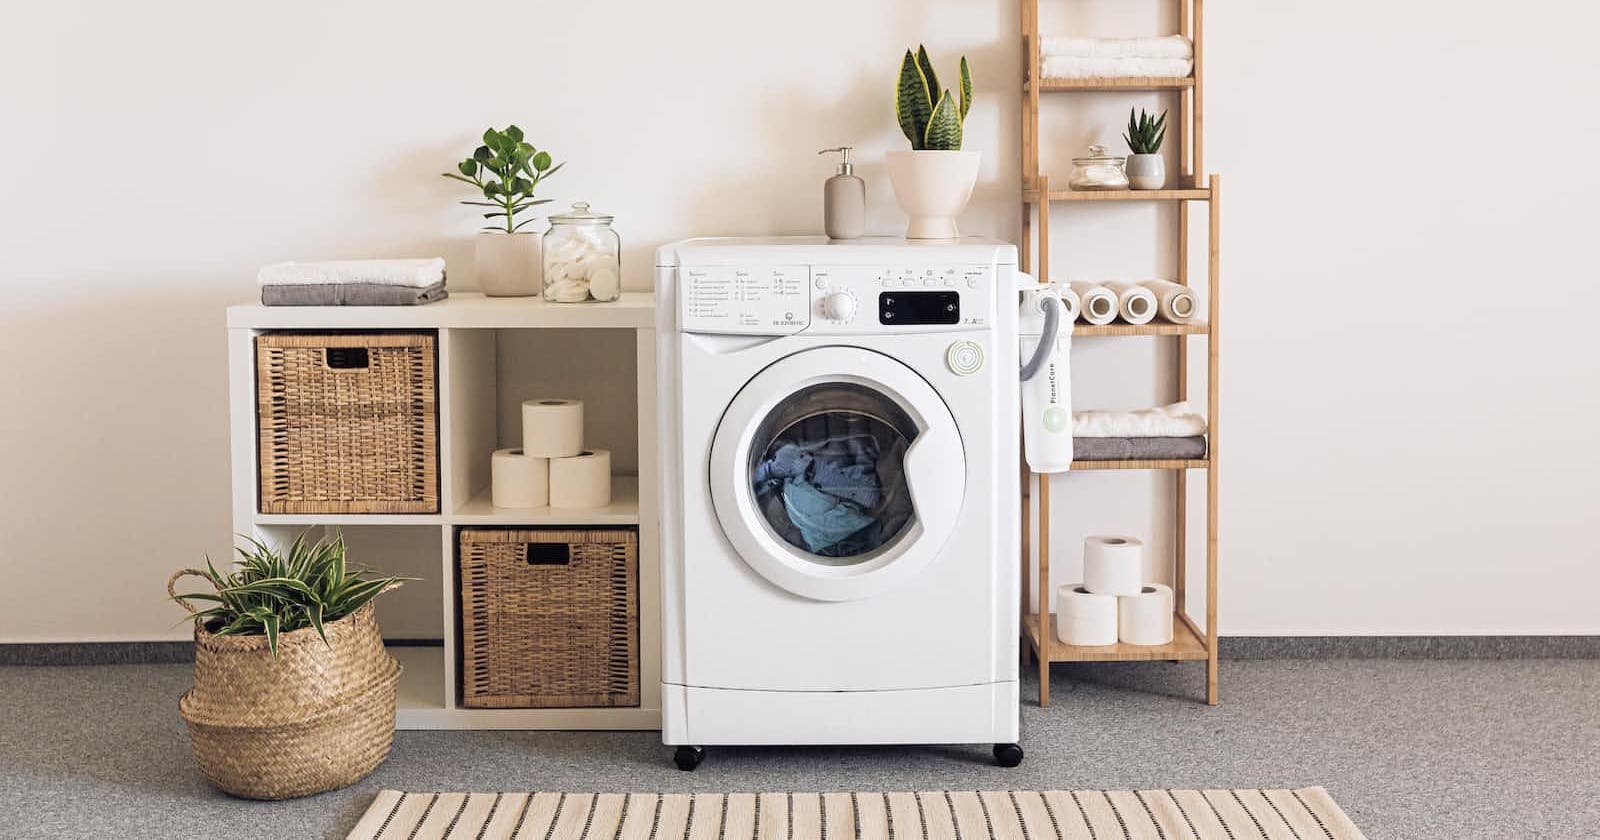 Make Your Laundry Day Easier! Learn How to Wash Clothes in the Washing Machine